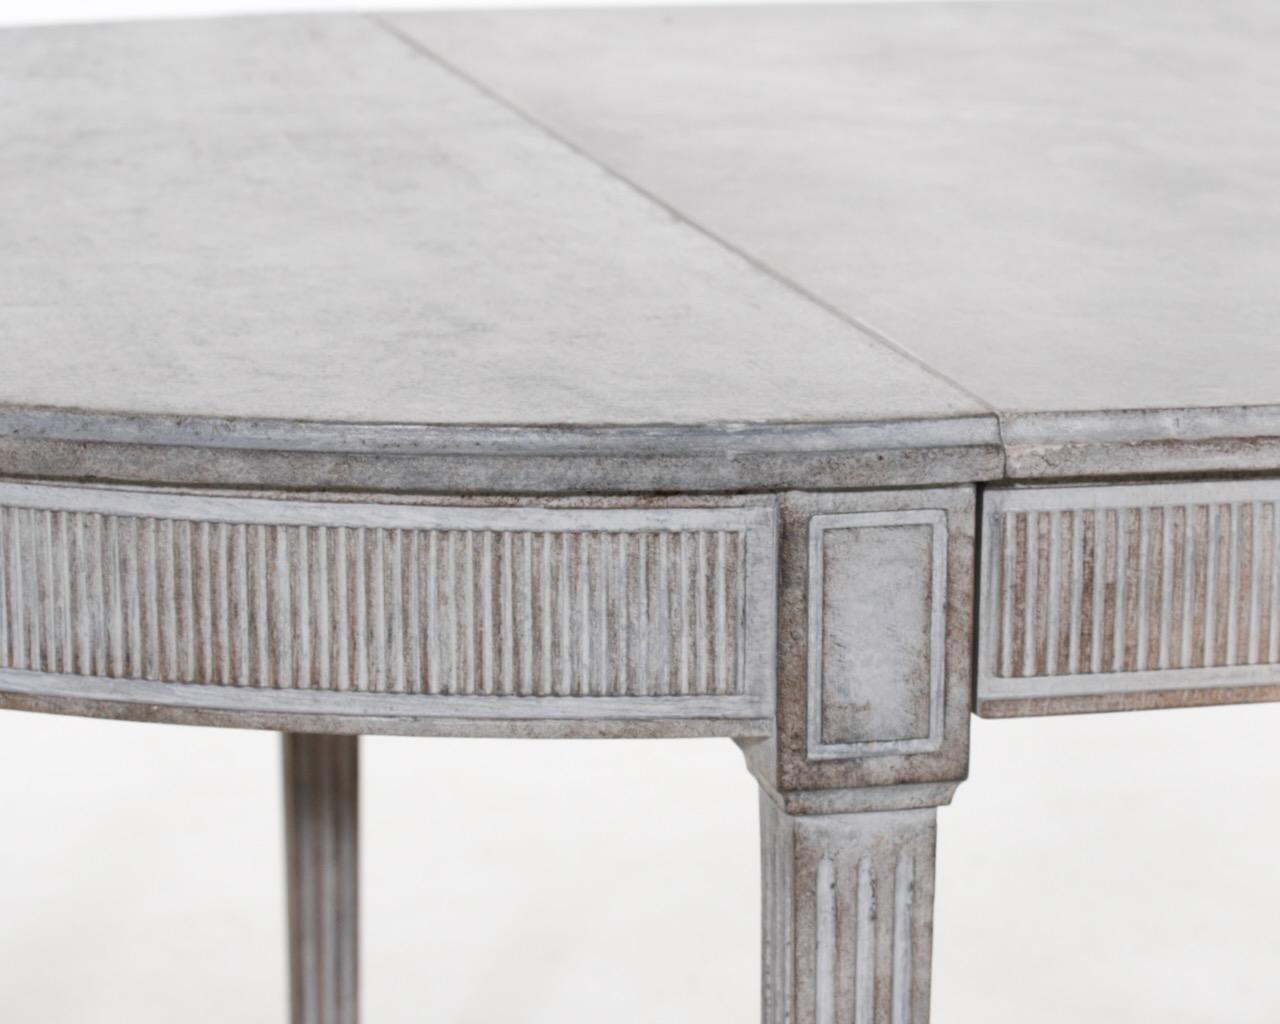 Very fine richly carved Gustavian style extension table with two leaves, late 19th century
Measures: H. 76 L-without. 116 L-total. 236 D. 115 cm
H. 29.9 L-without. 45.6 L-total. 92.9 D. 45.2 in.